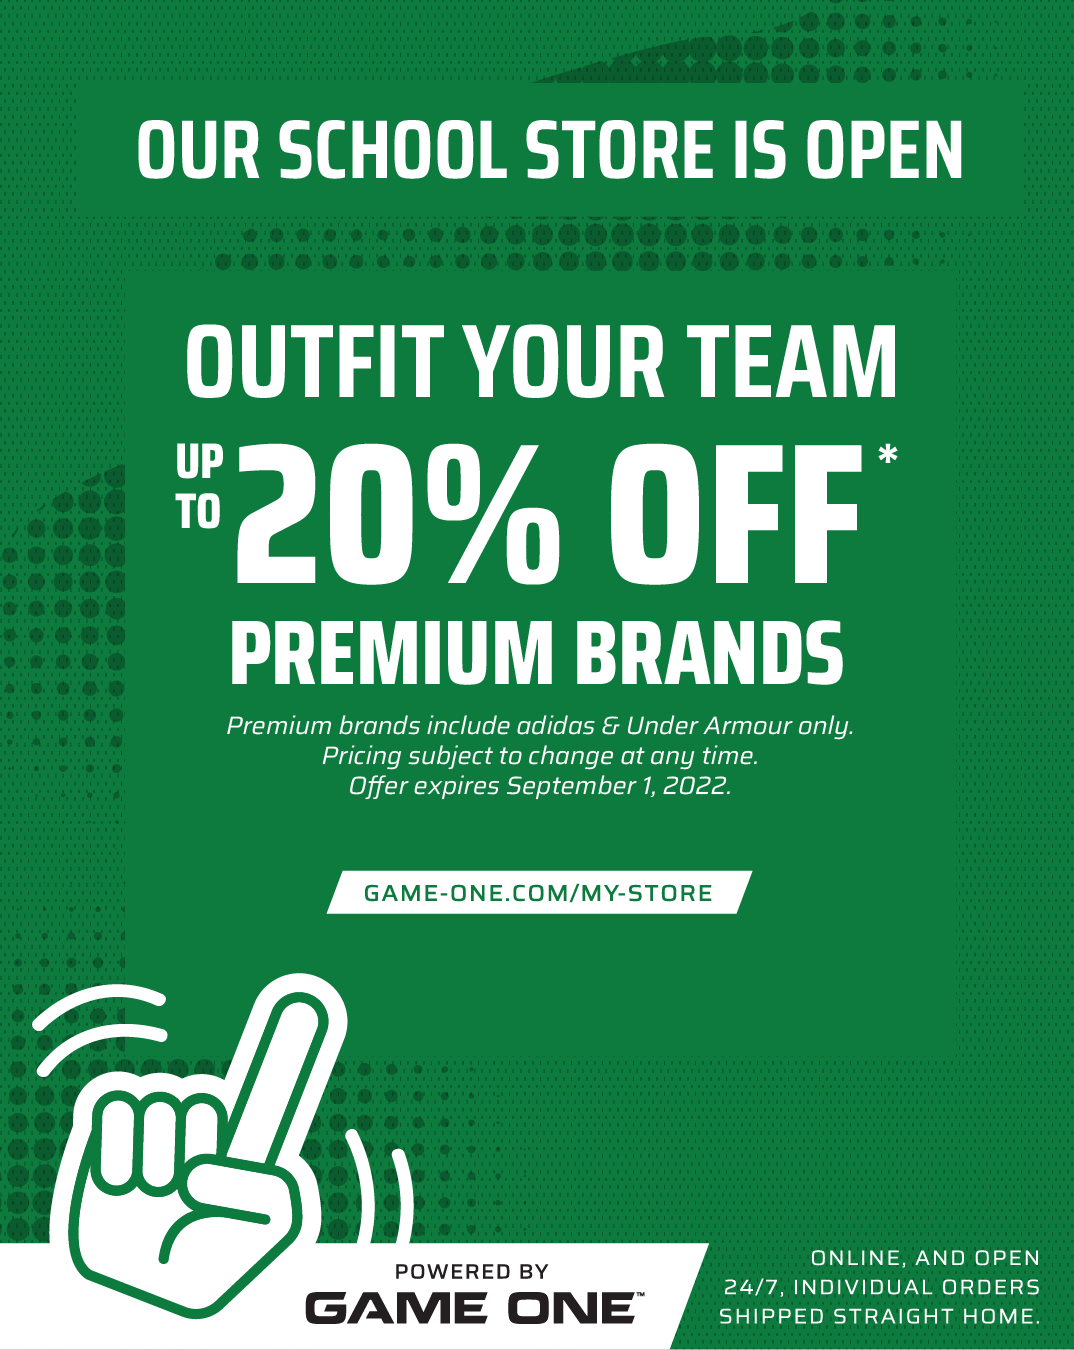 Our School Store is Open - Powered By Game One